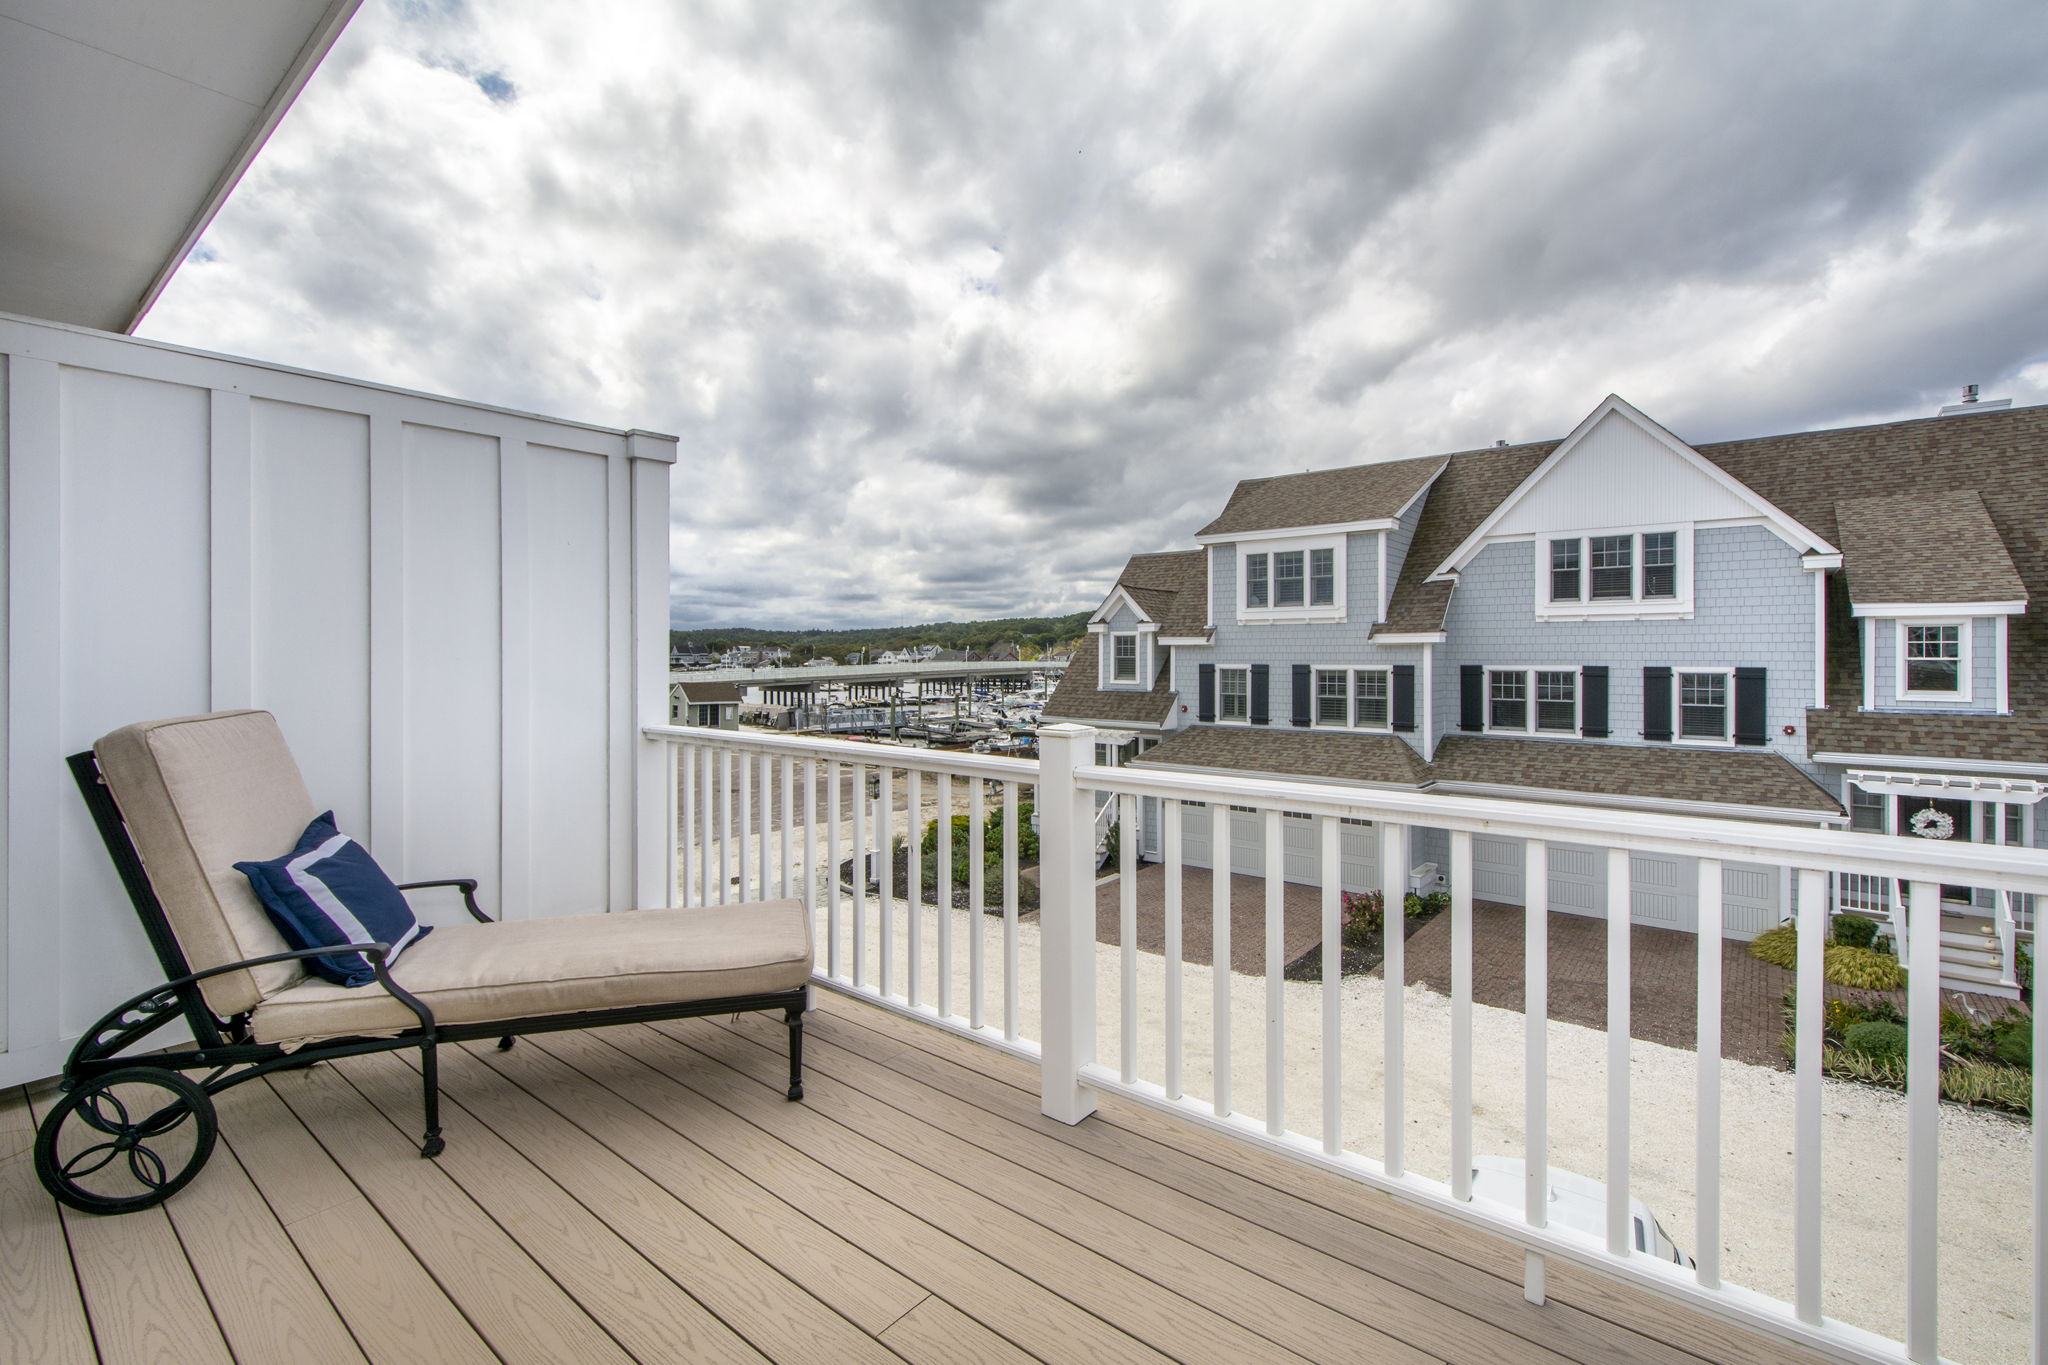  33 Central Ave Unit 9, Scituate, MA 02050, US Photo 33